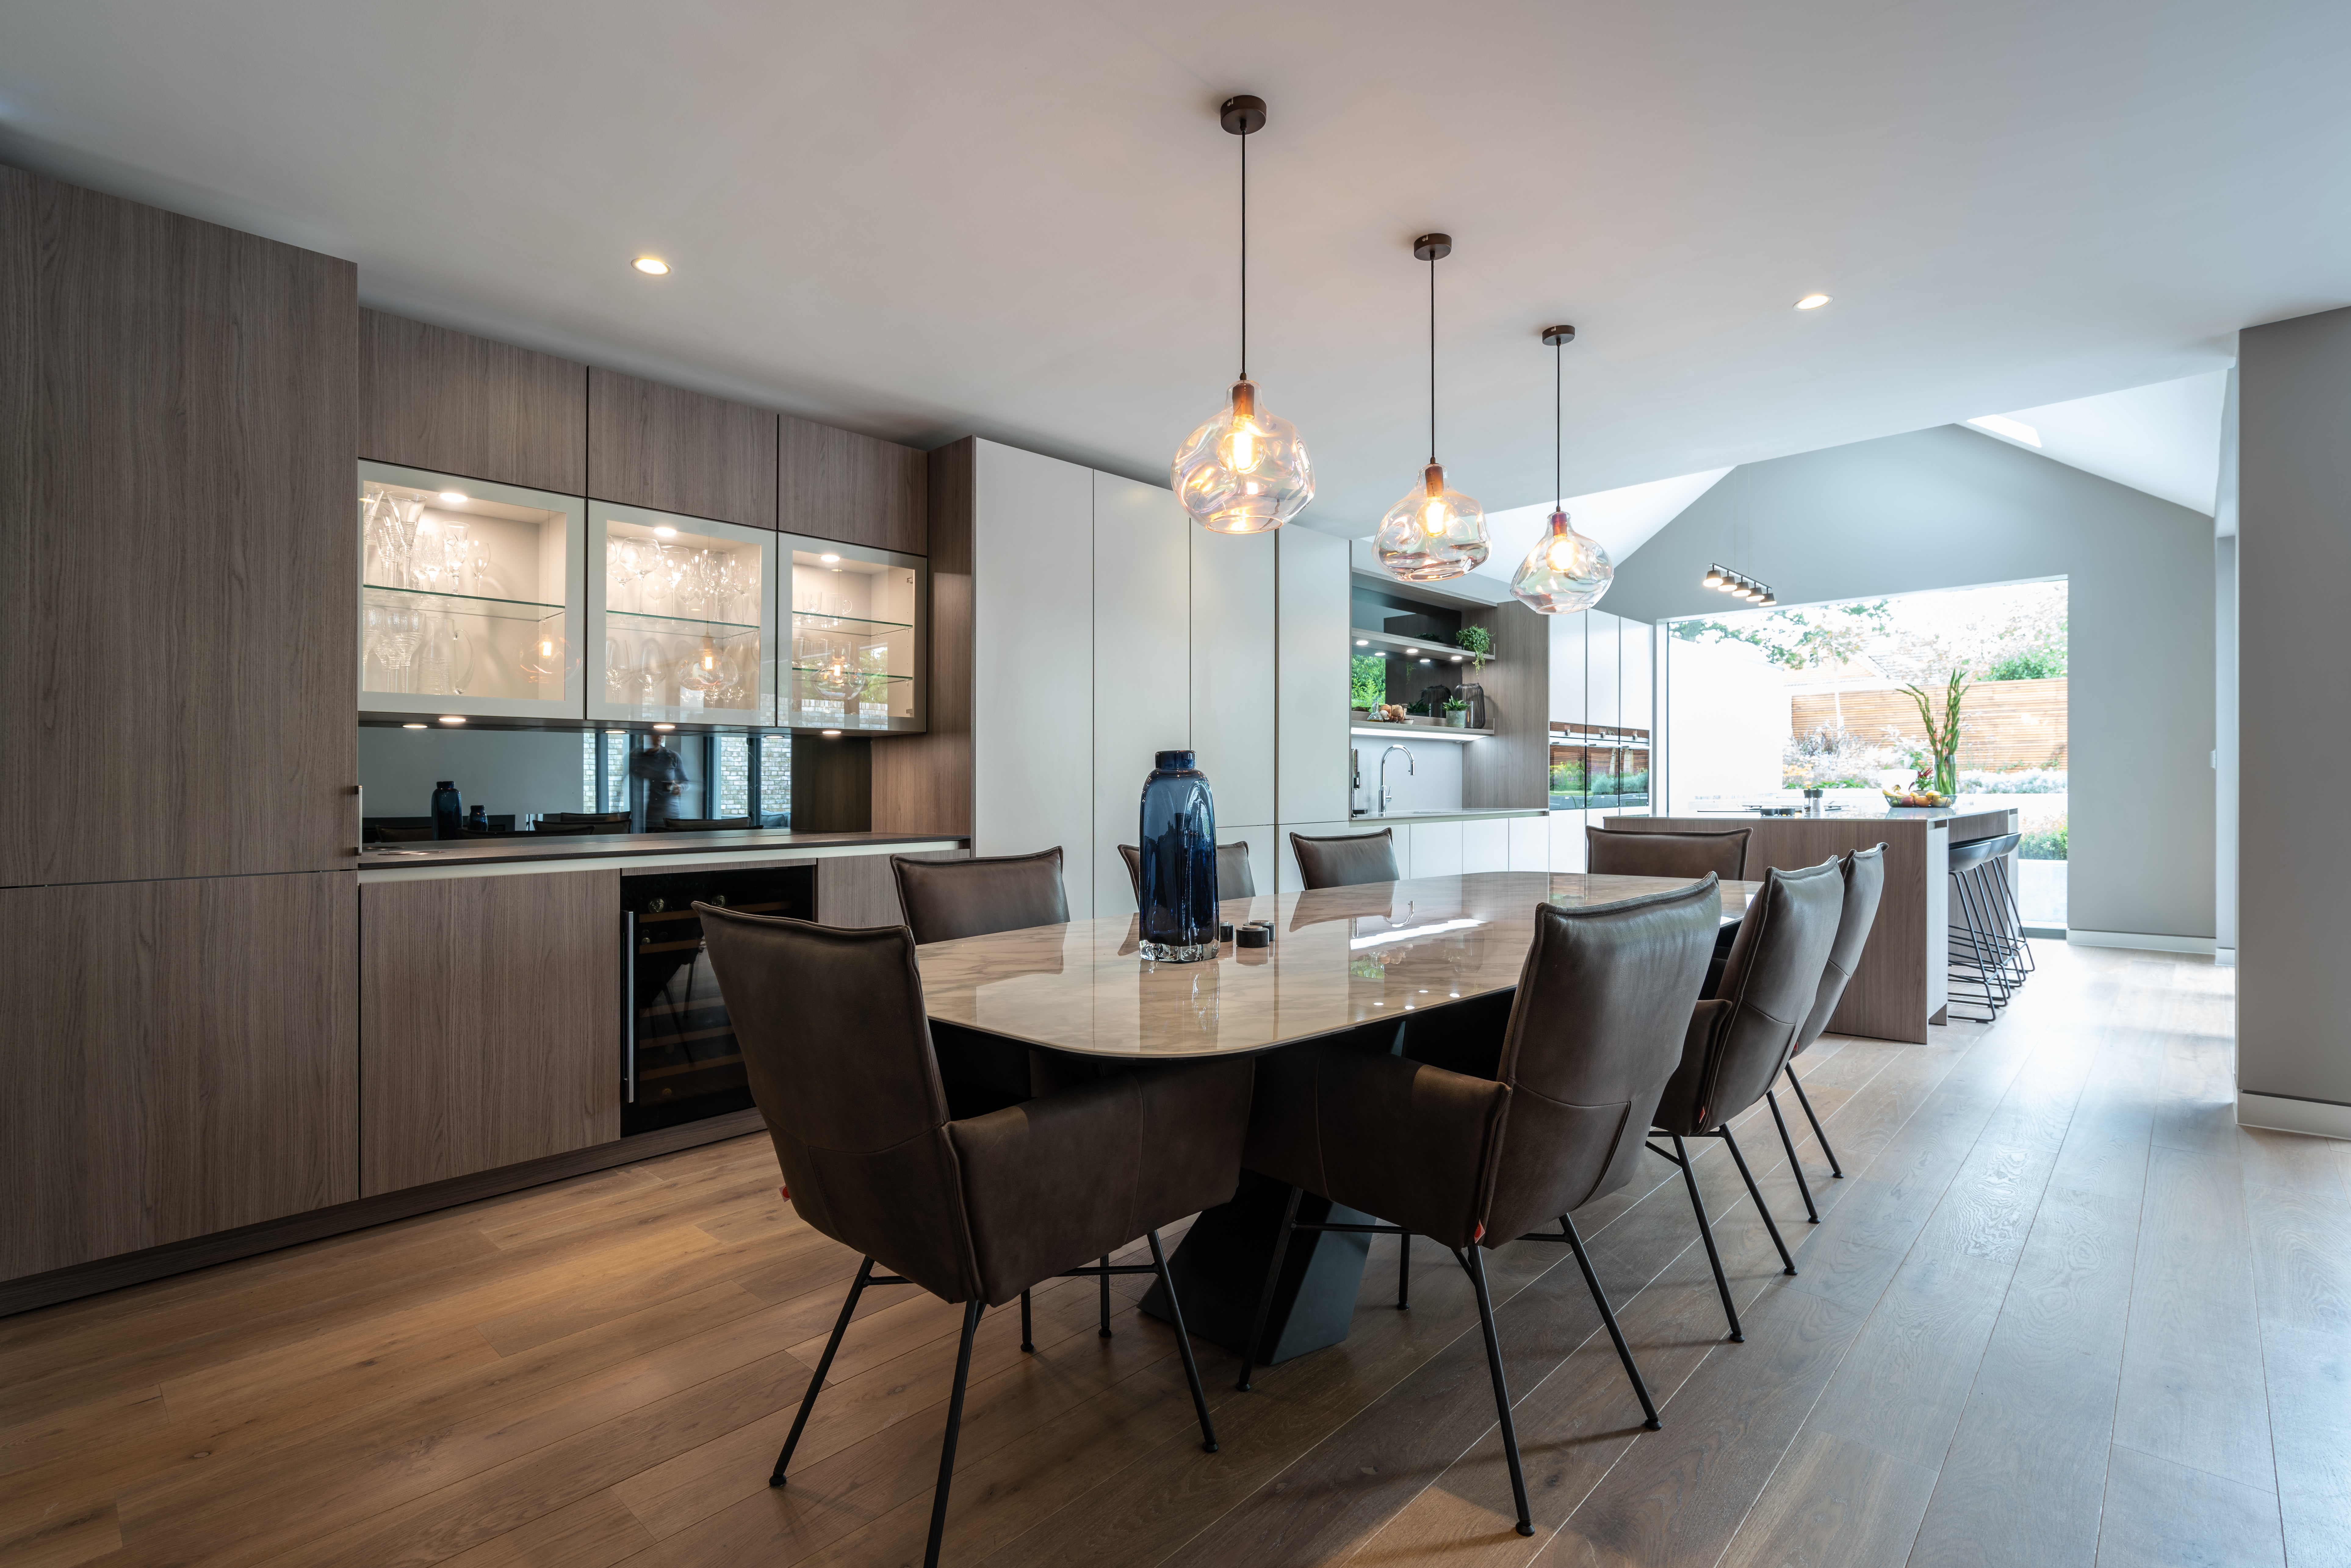 modern design in an open plan kitchen and dining area